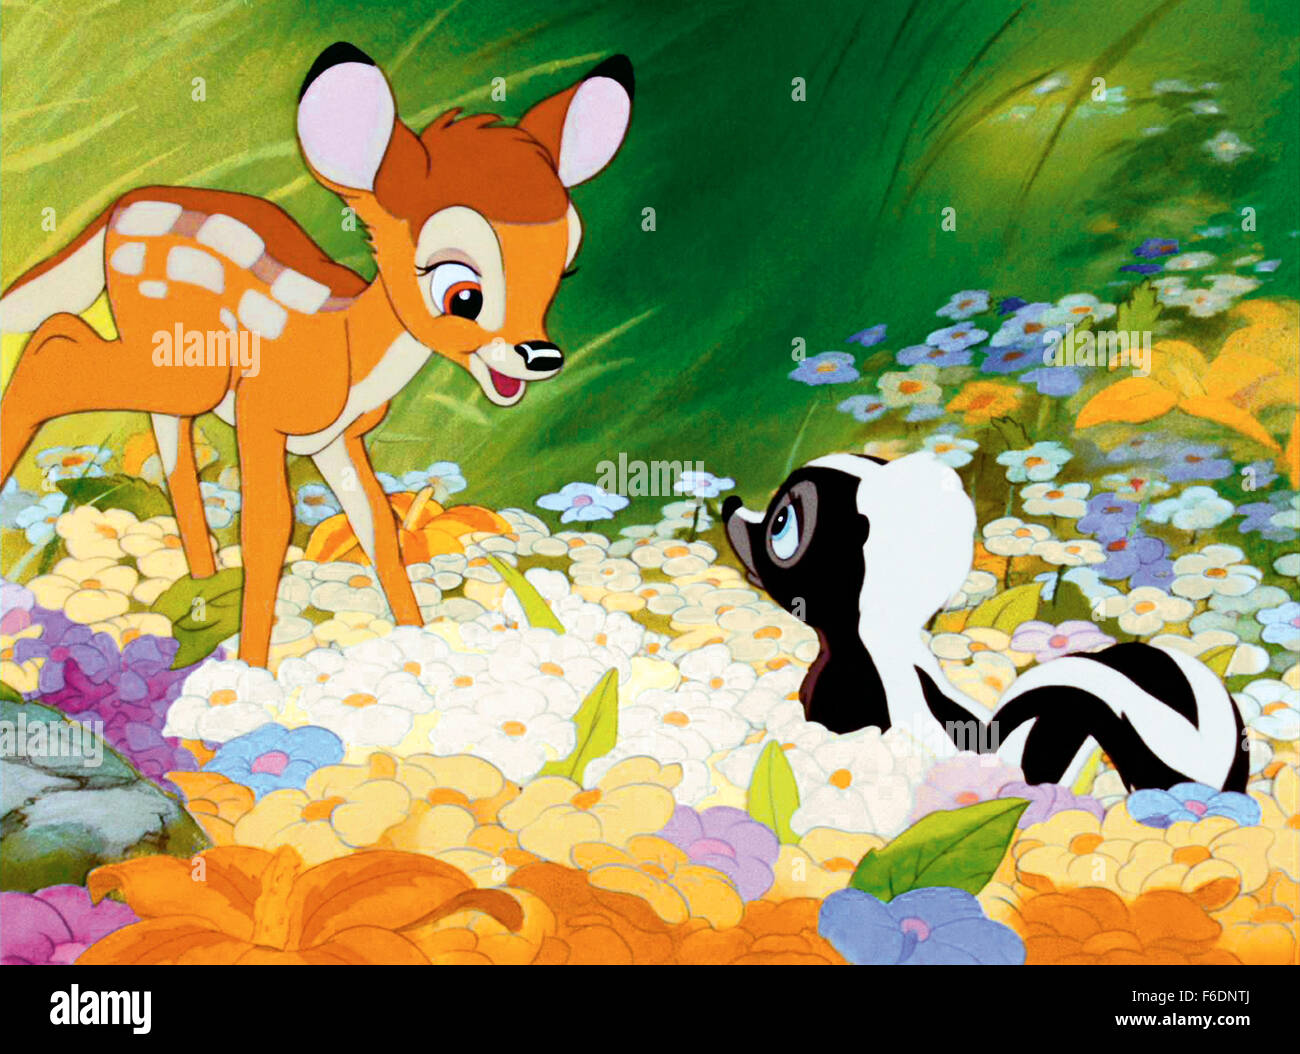 RELEASE DATE: August 21, 1942. MOVIE TITLE: Bambi. STUDIO: Walt Disney Productions. PLOT: The animated story of Bambi, a young deer hailed as the 'Prince of the Forest' at his birth. As Bambi grows, he makes friends with the other animals of the forest, learns the skills needed to survive, and even finds love. One day, however, the hunters come, and Bambi must learn to be as brave as his father if he is to lead the other deer to safety. PICTURED: . Stock Photo